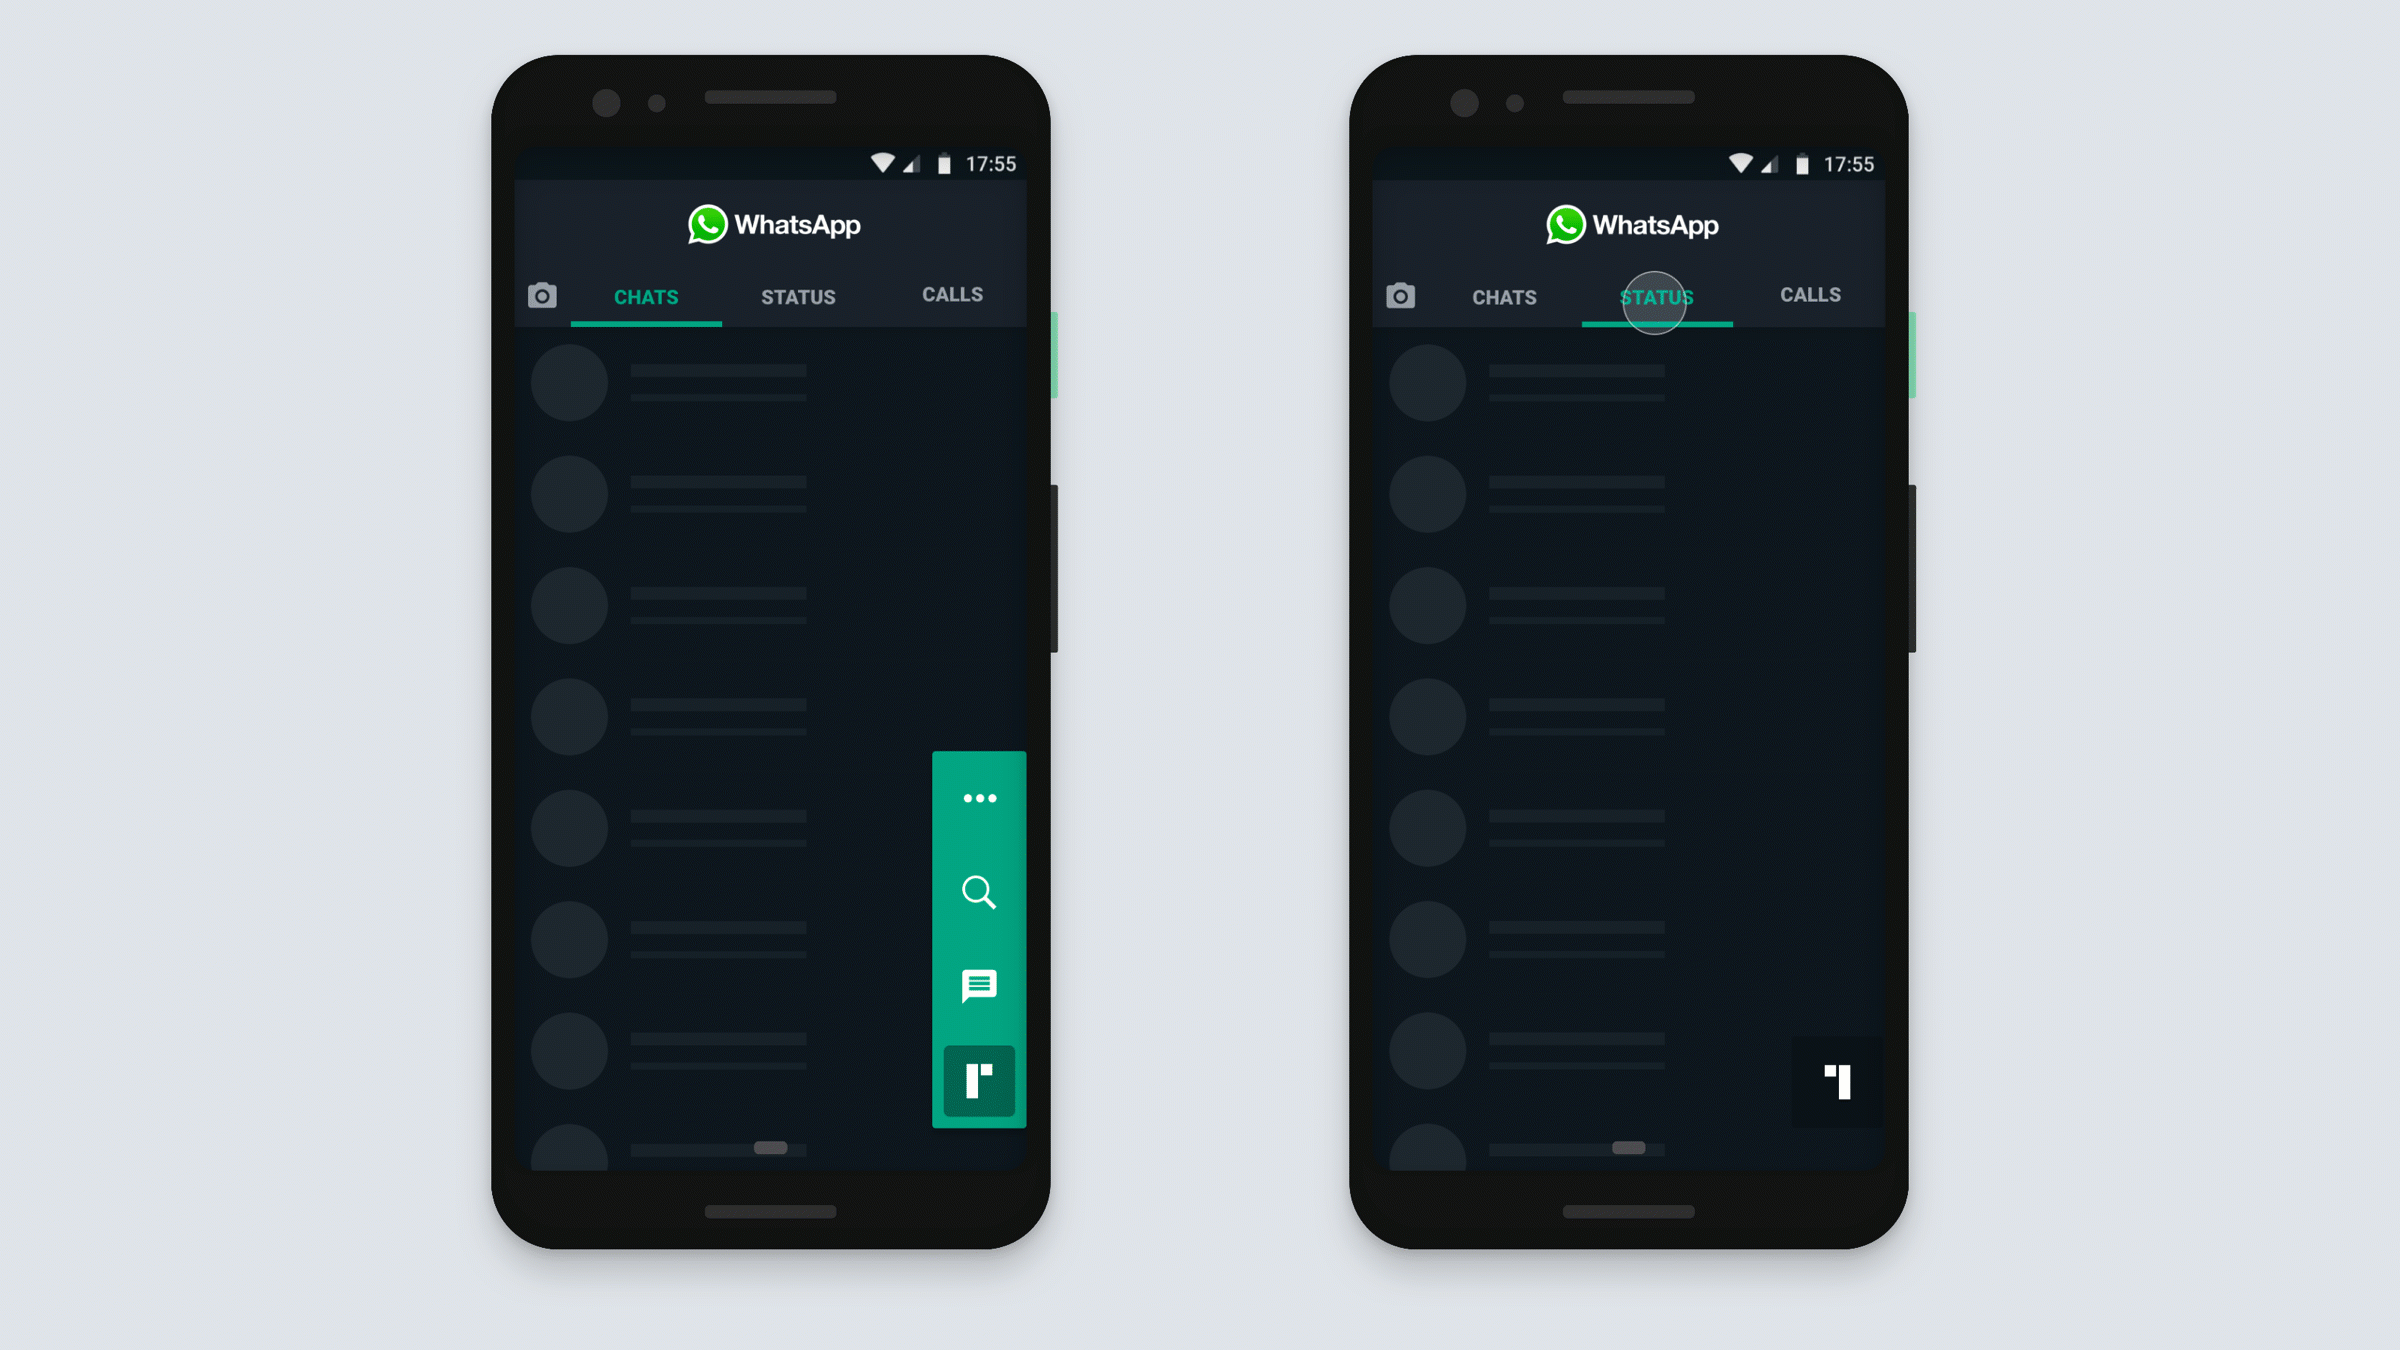 A prototype showing the reimagined WhatsApp with the flo menu.